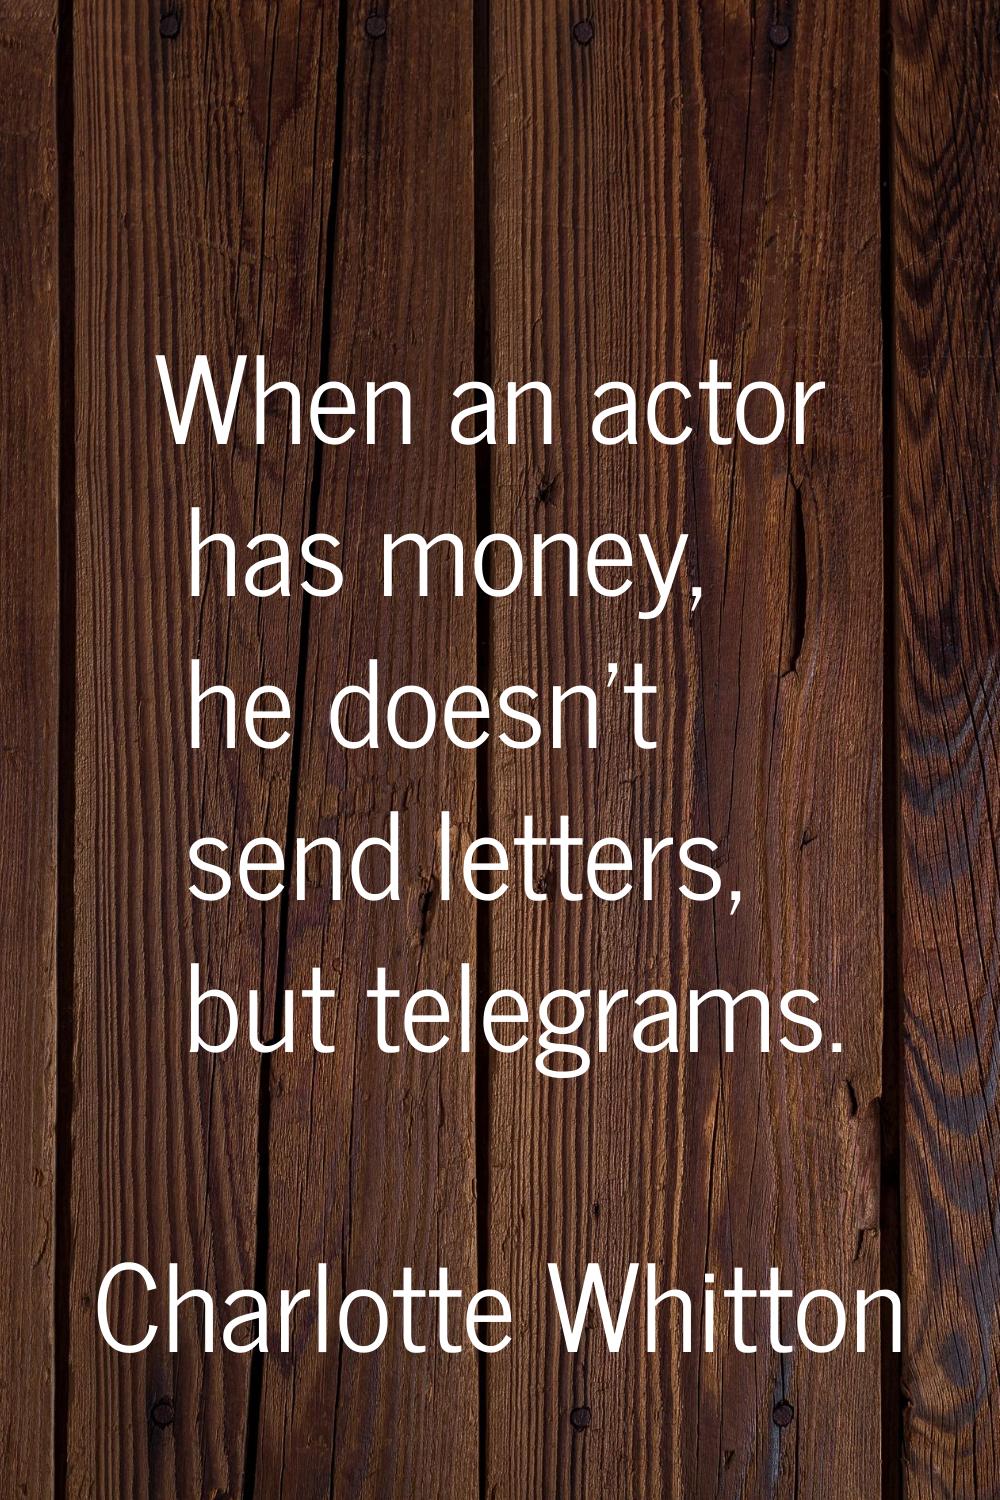 When an actor has money, he doesn't send letters, but telegrams.